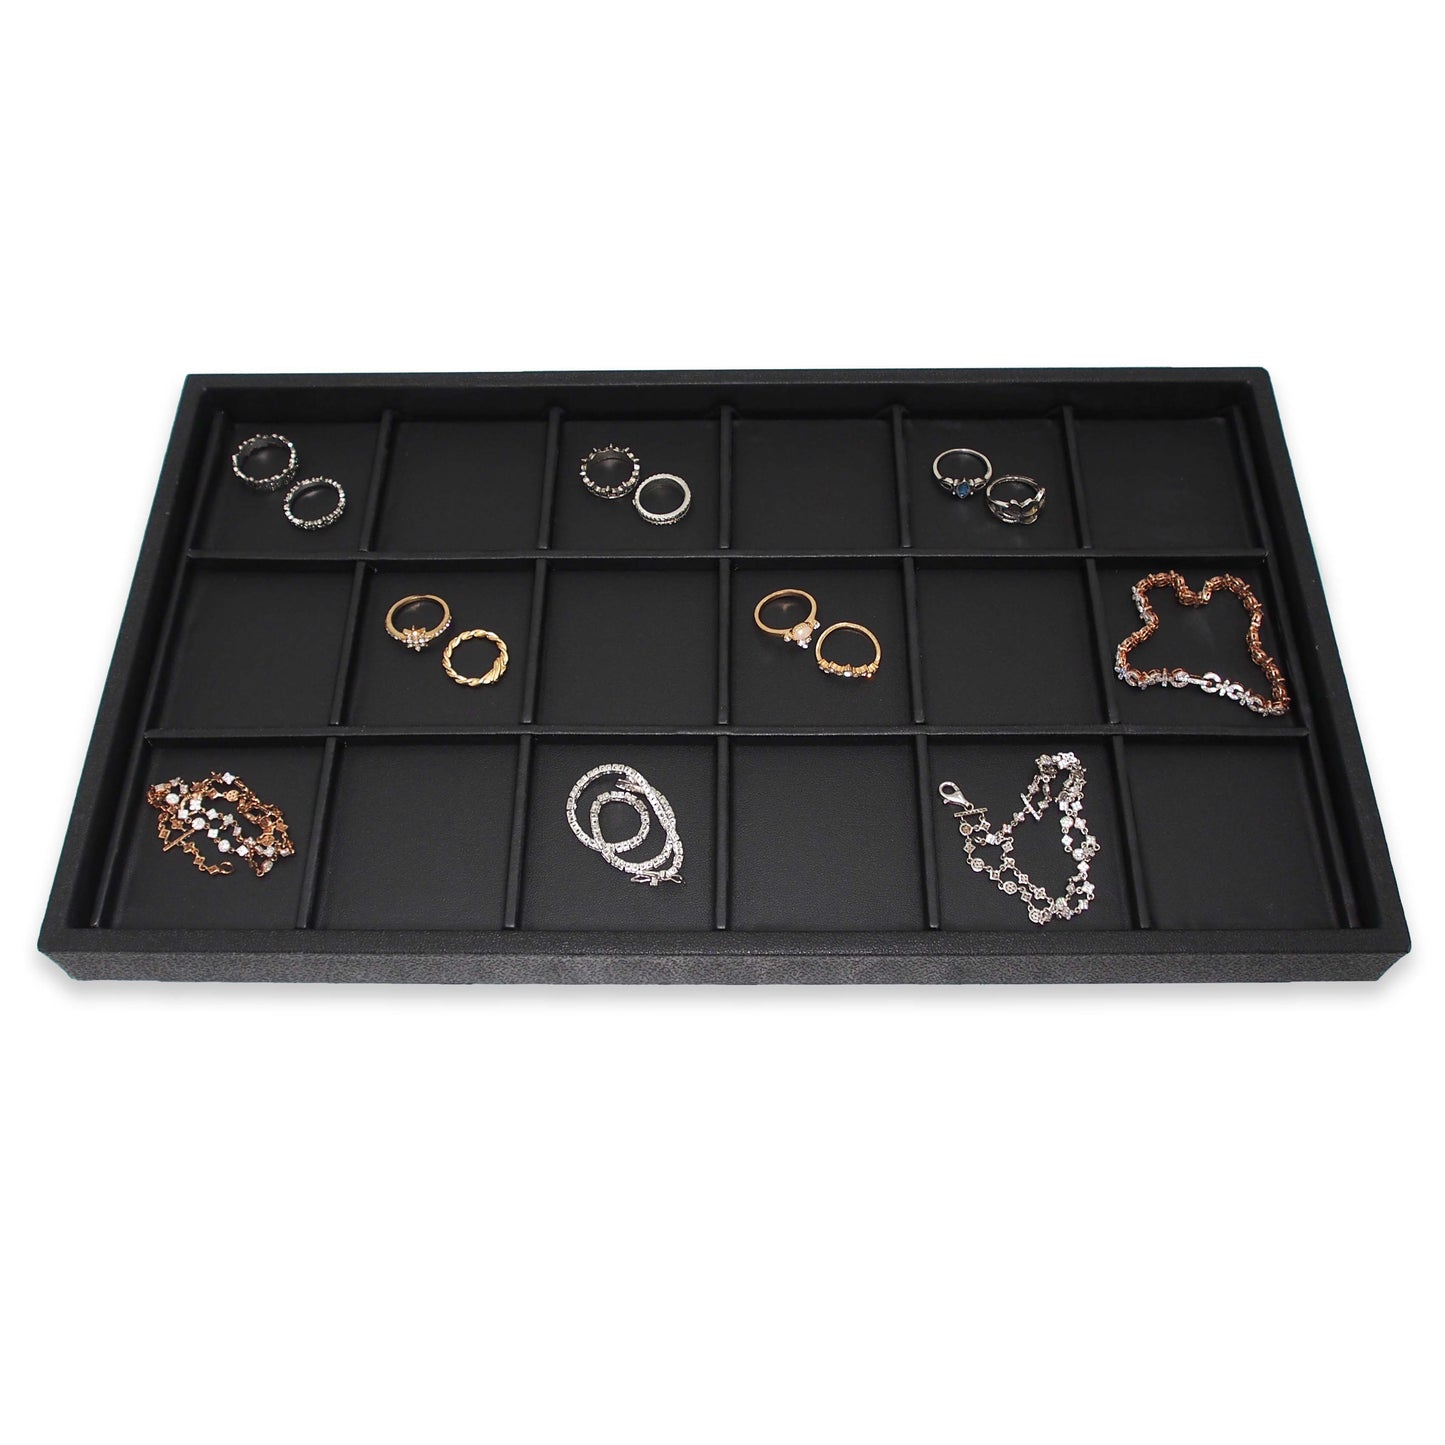 Black 18 Section Deluxe Full Size Jewelry Display Tray Inserts